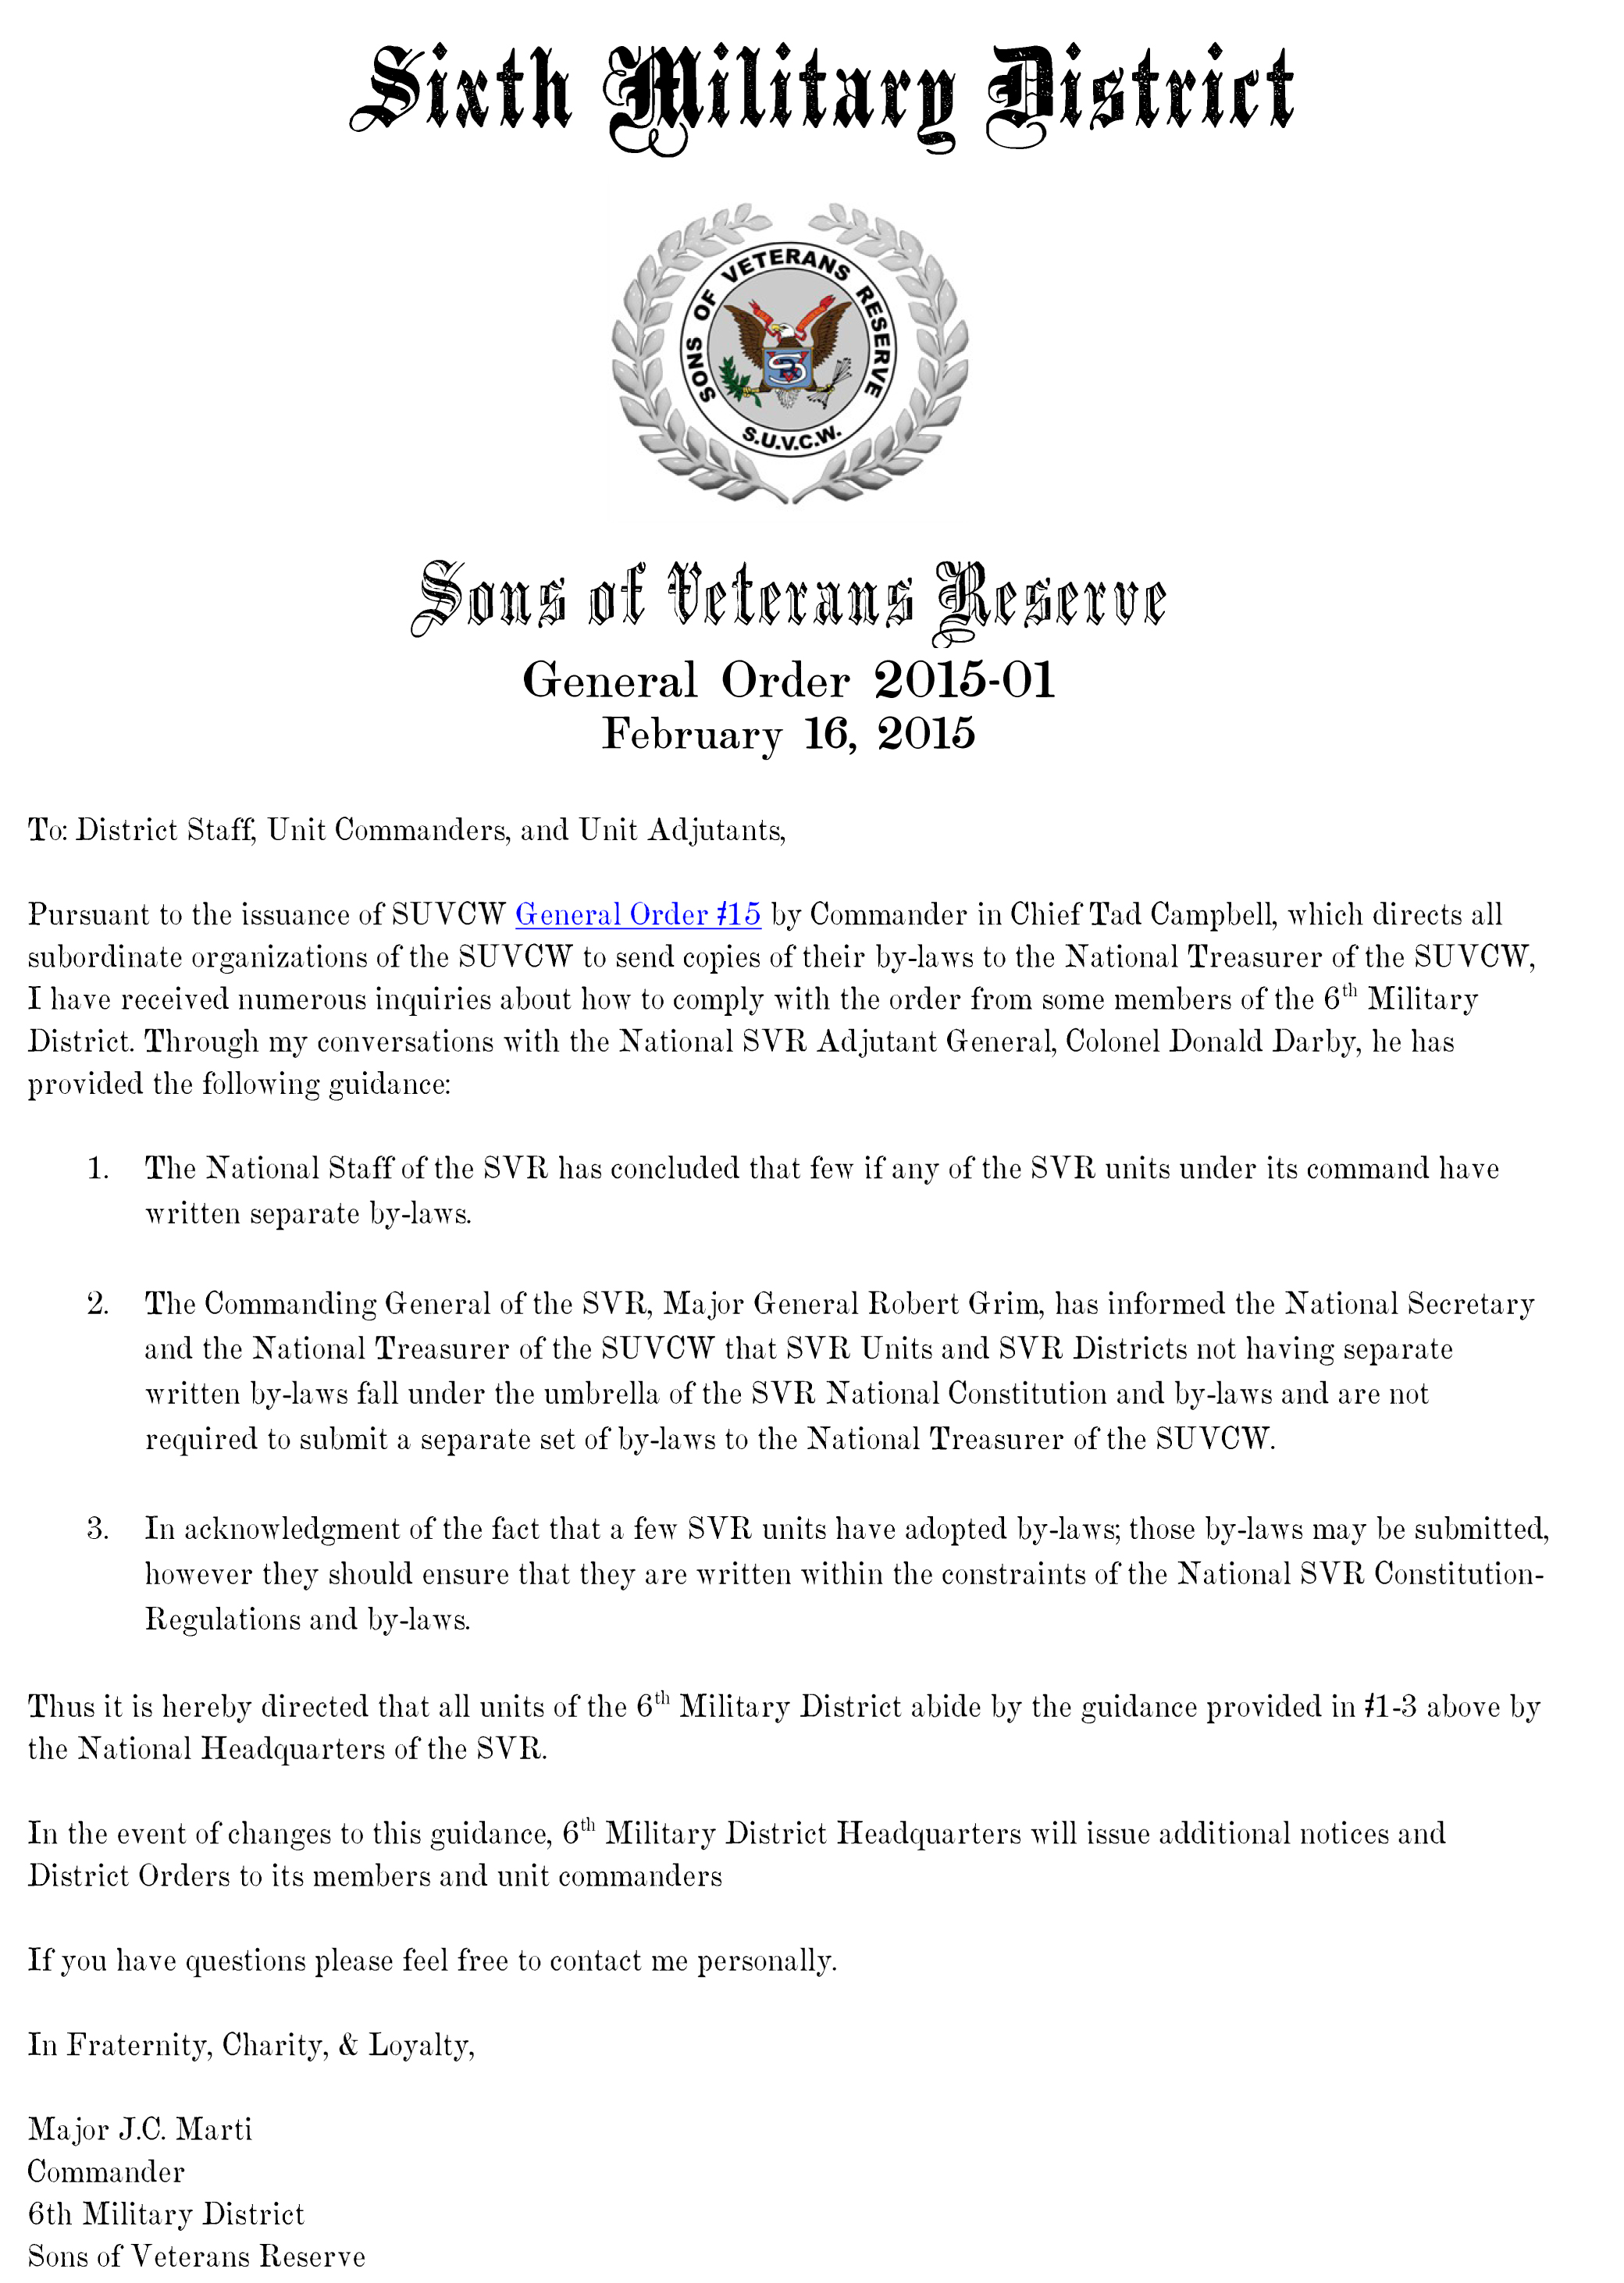 Special Orders 6th Military District, Sons of Veterans Reserve